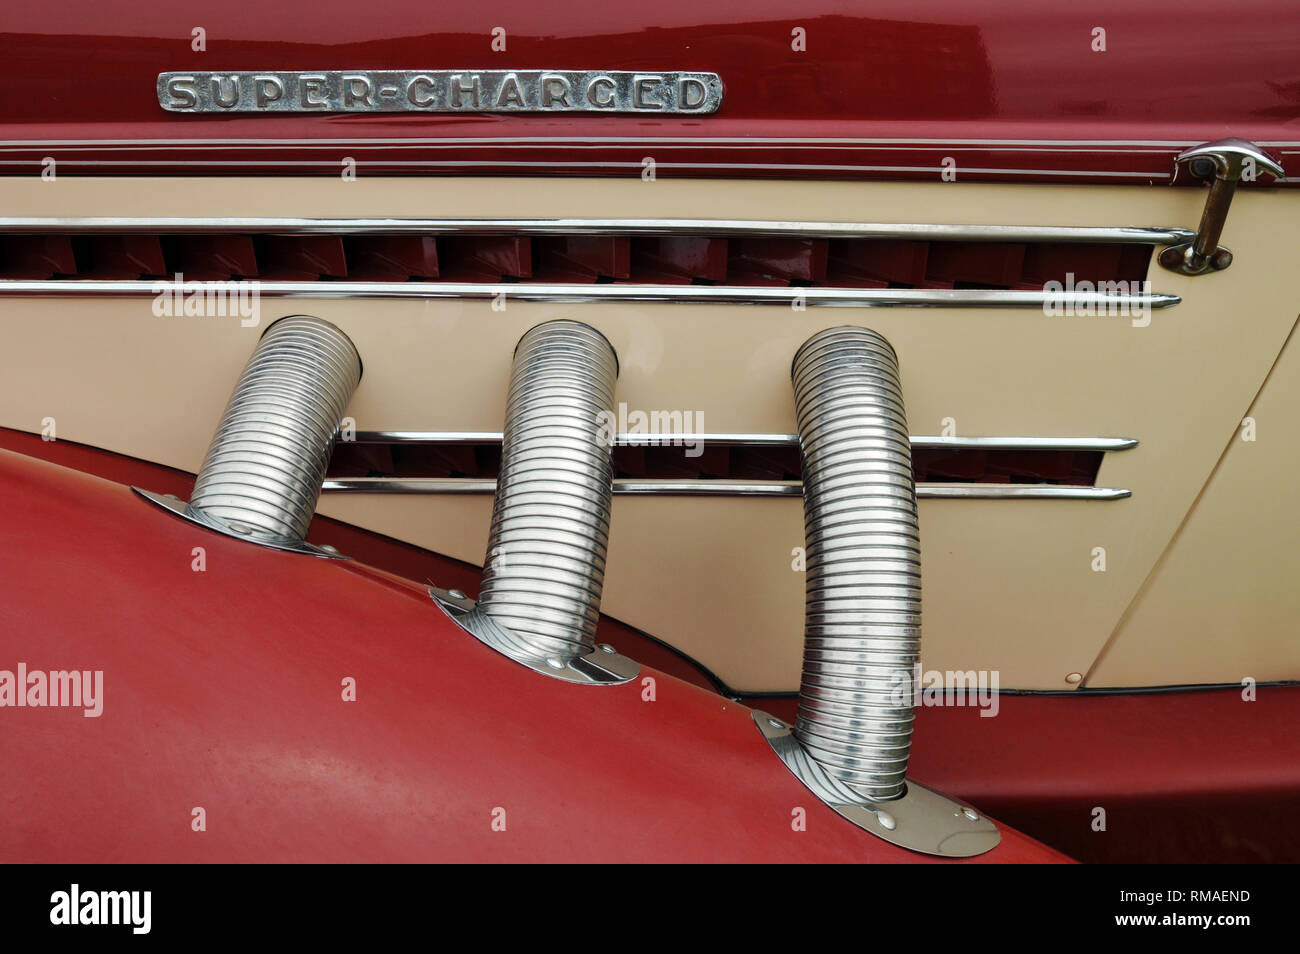 Detail of the chrome-plated external exhaust pipes on a classic Supercharged Auburn automobile. Stock Photo